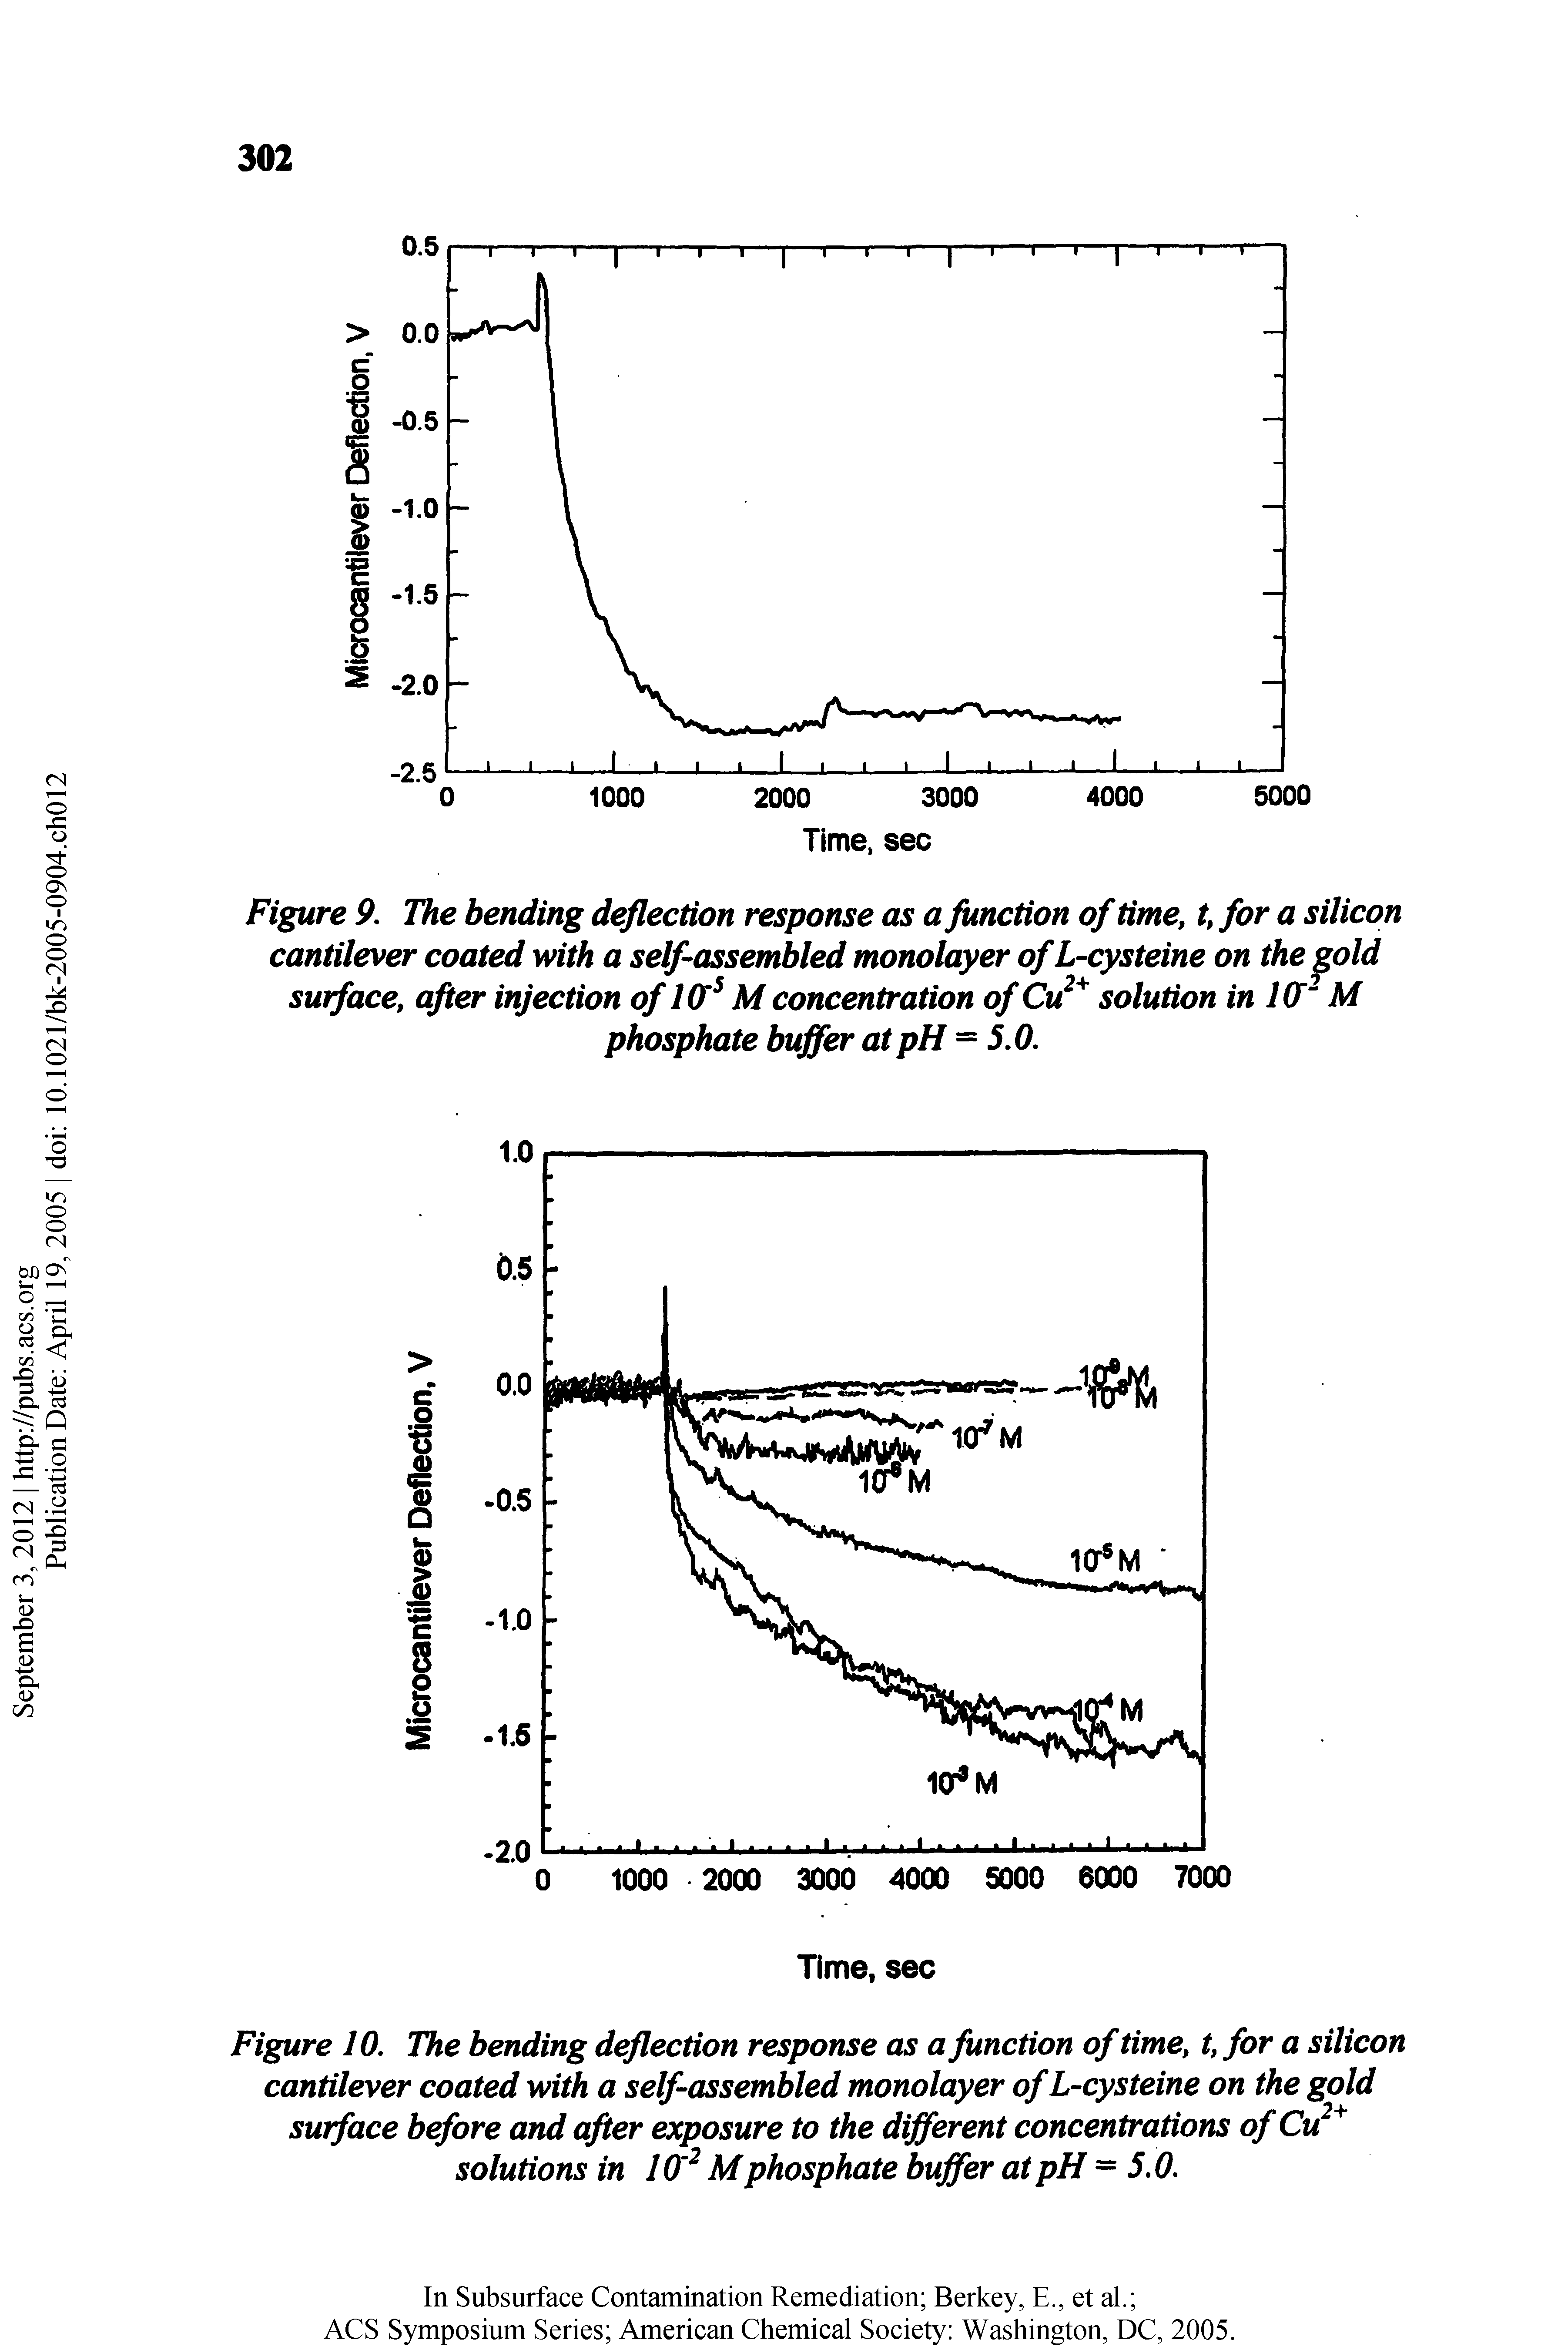 Figure 9. The bending deflection response as a function of time, t, for a silicon cantilever coated with a self-assembled monolayer of L-cysteine on the gold surface, after injection of 1(T M concentration of Cu solution in 1(T M phosphate buffer at pH = 5.0.